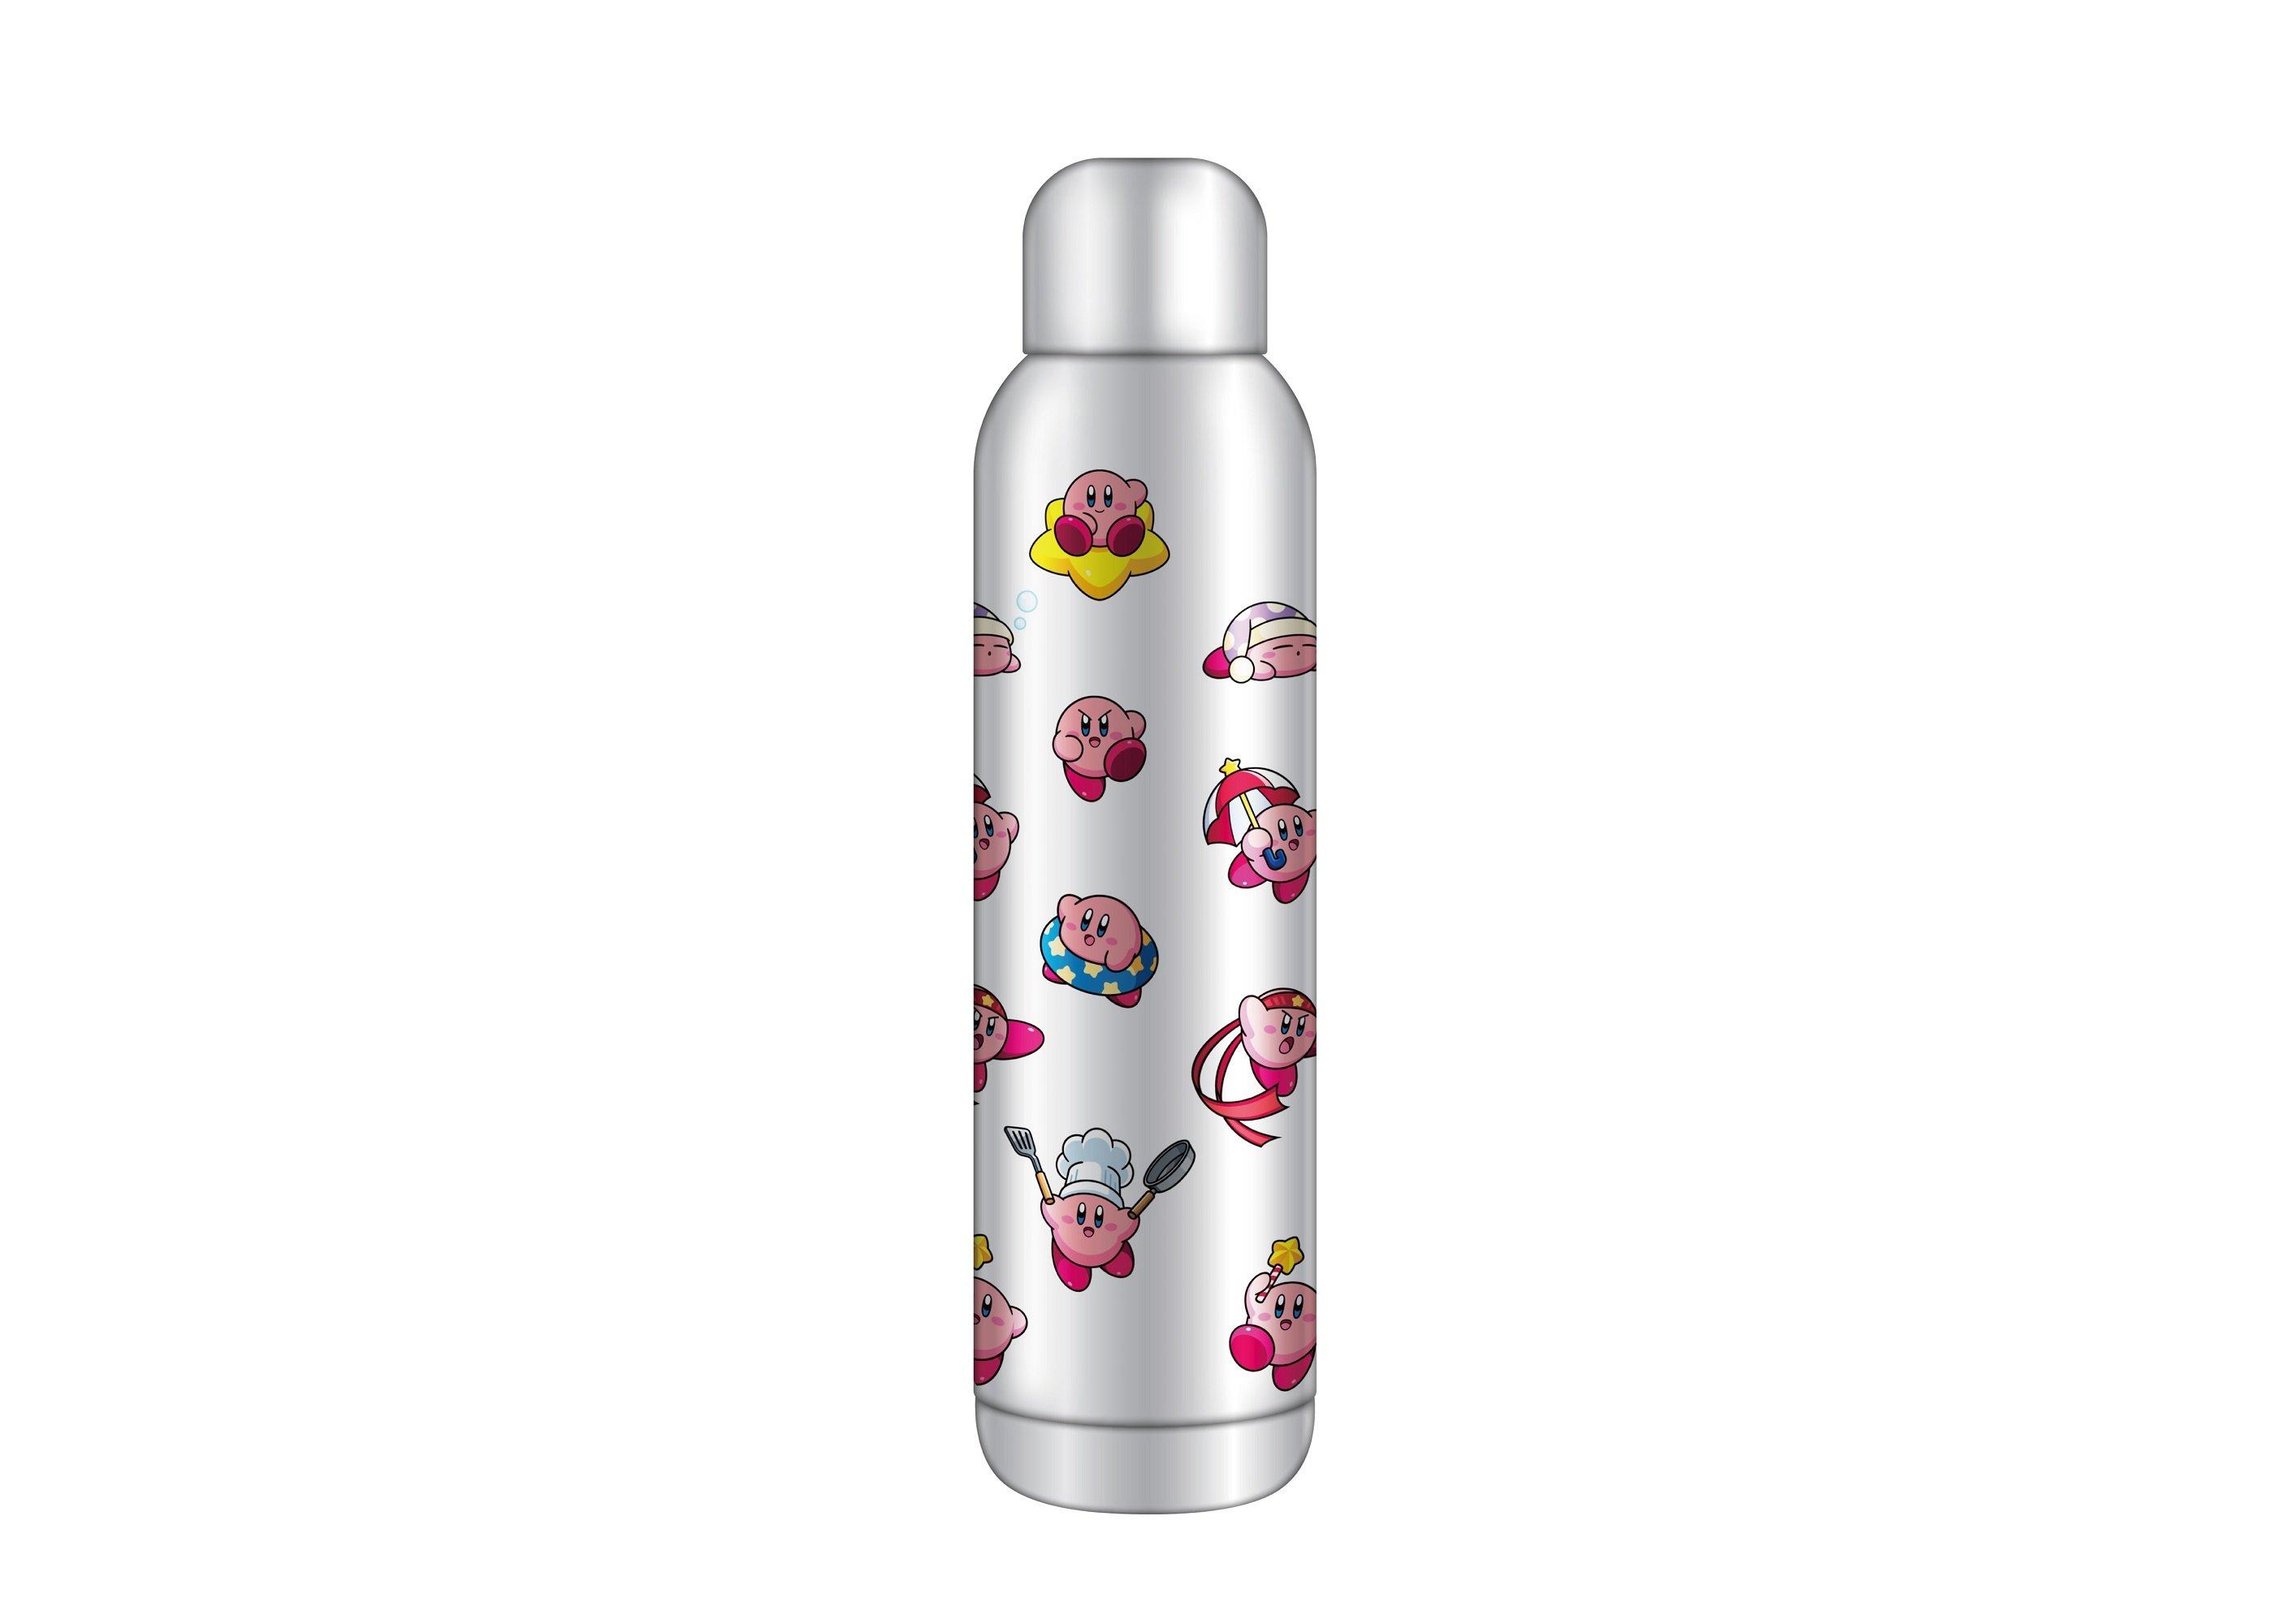 https://media.gamestop.com/i/gamestop/20008121/Kirby-Classic-Video-Game-All-Over-Print-22-oz-Stainless-Steel-Water-Bottle?$pdp$